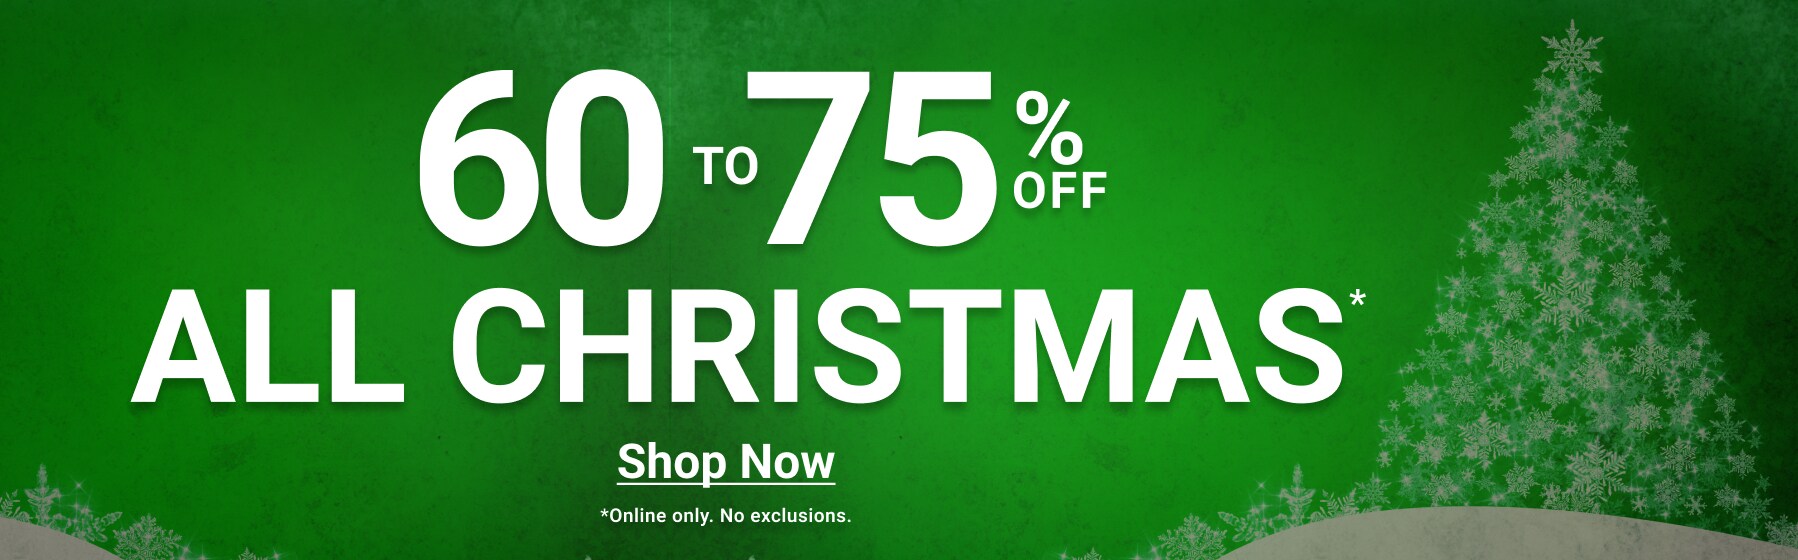 60-75% Off All Christmas - Shop Now